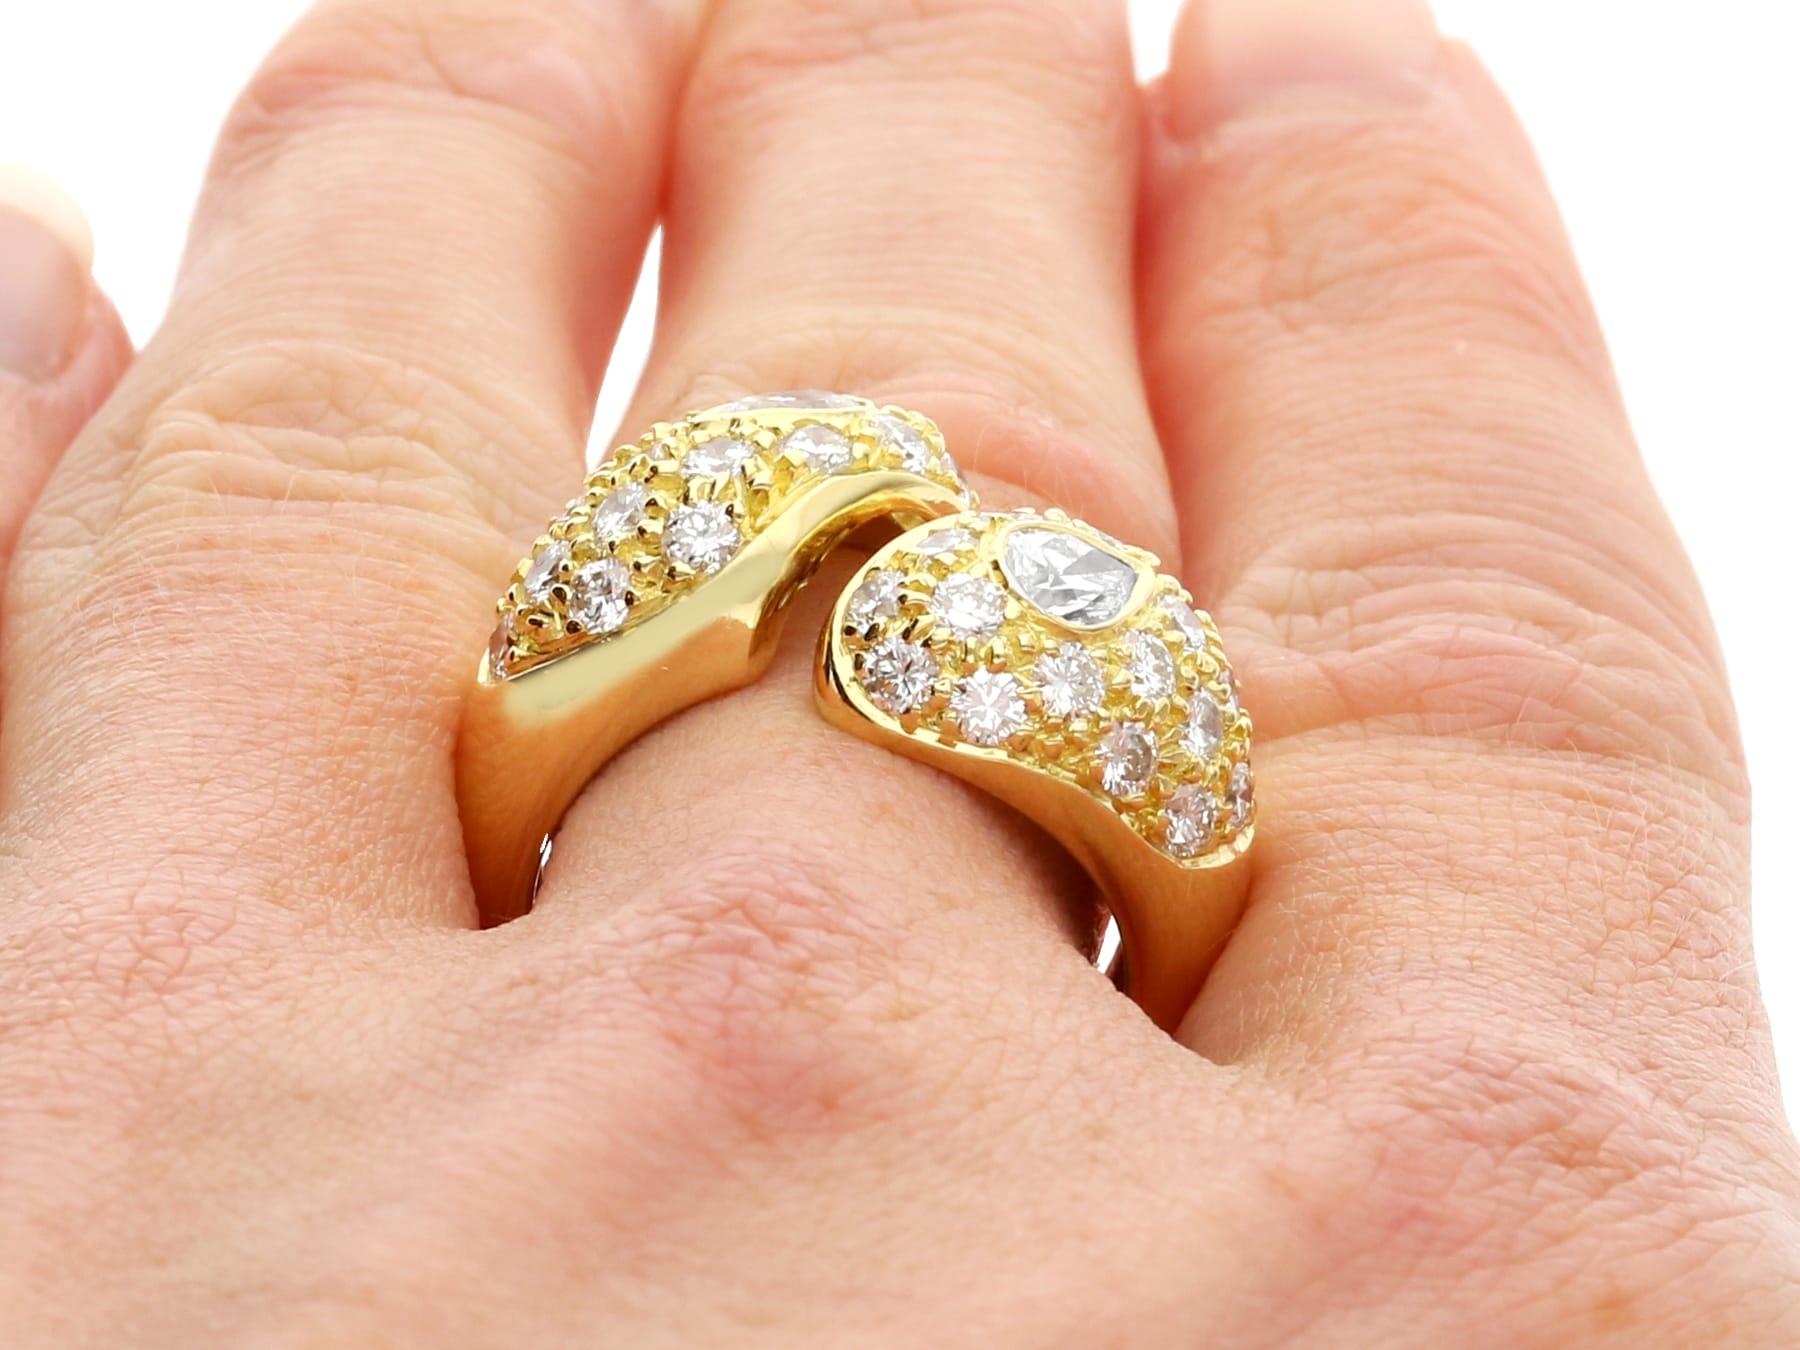 Vintage 1.78 Carat Diamond and 18k Yellow Gold Snake Ring For Sale 4